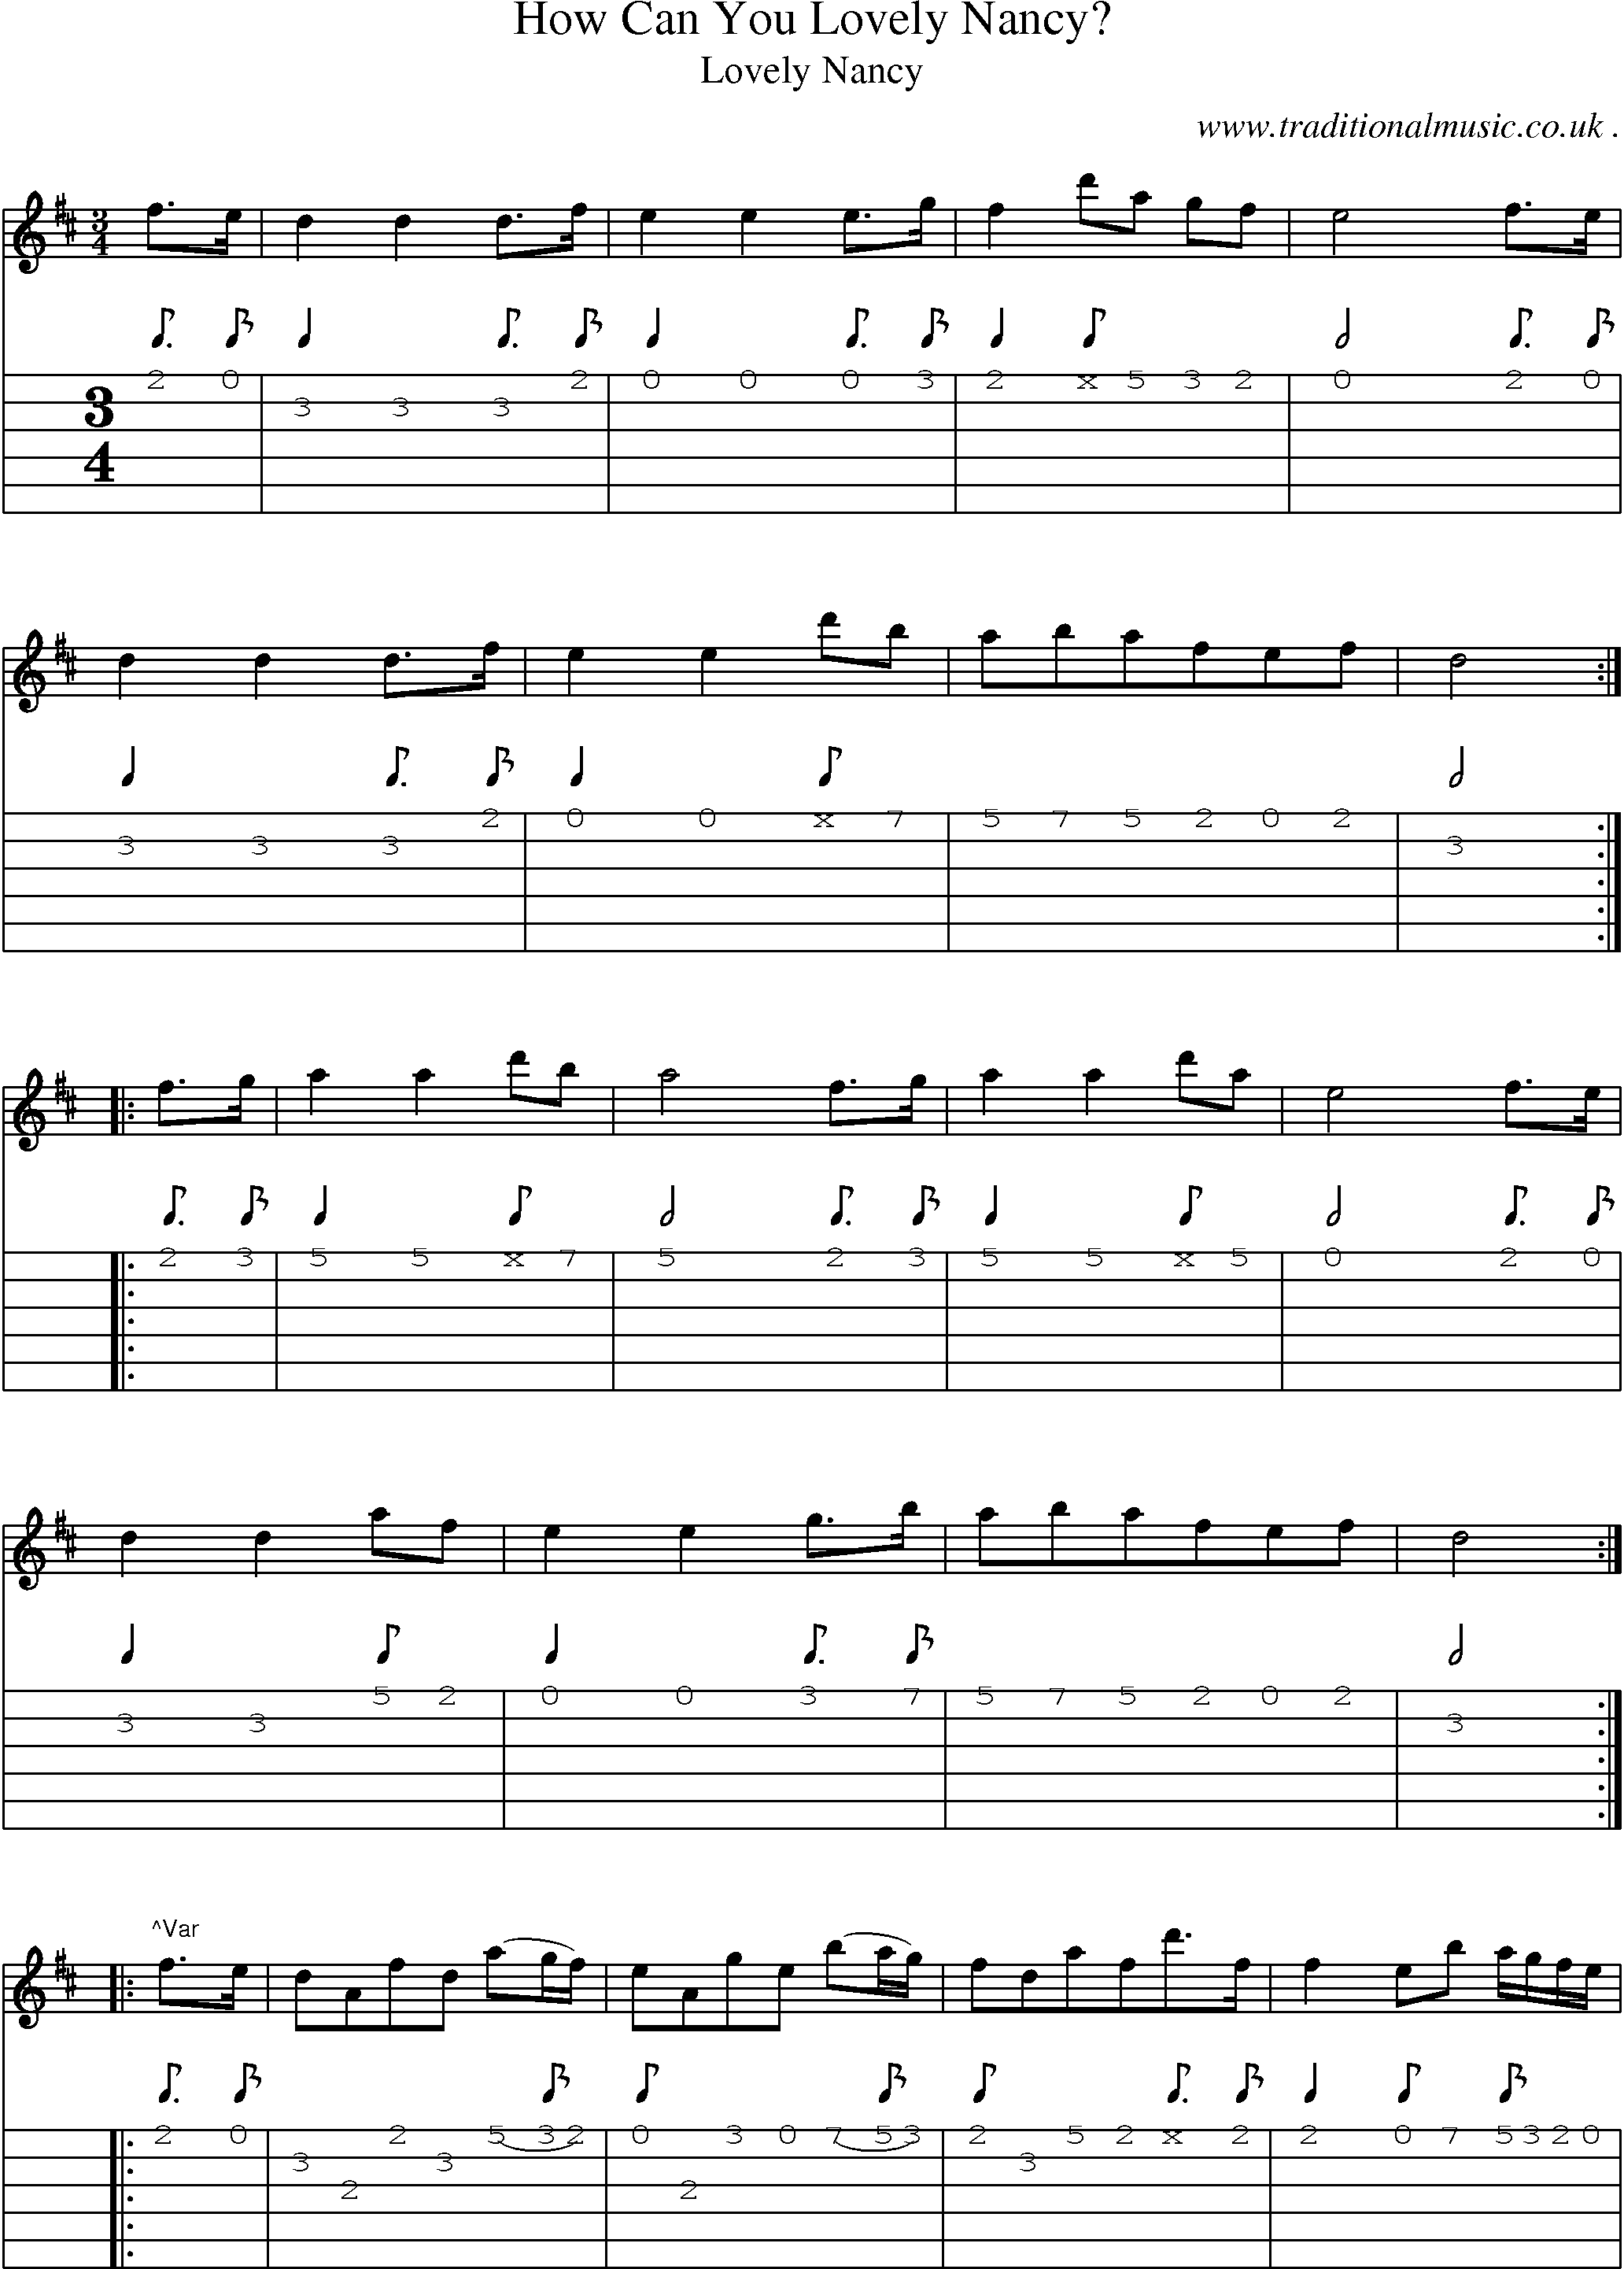 Sheet-Music and Guitar Tabs for How Can You Lovely Nancy